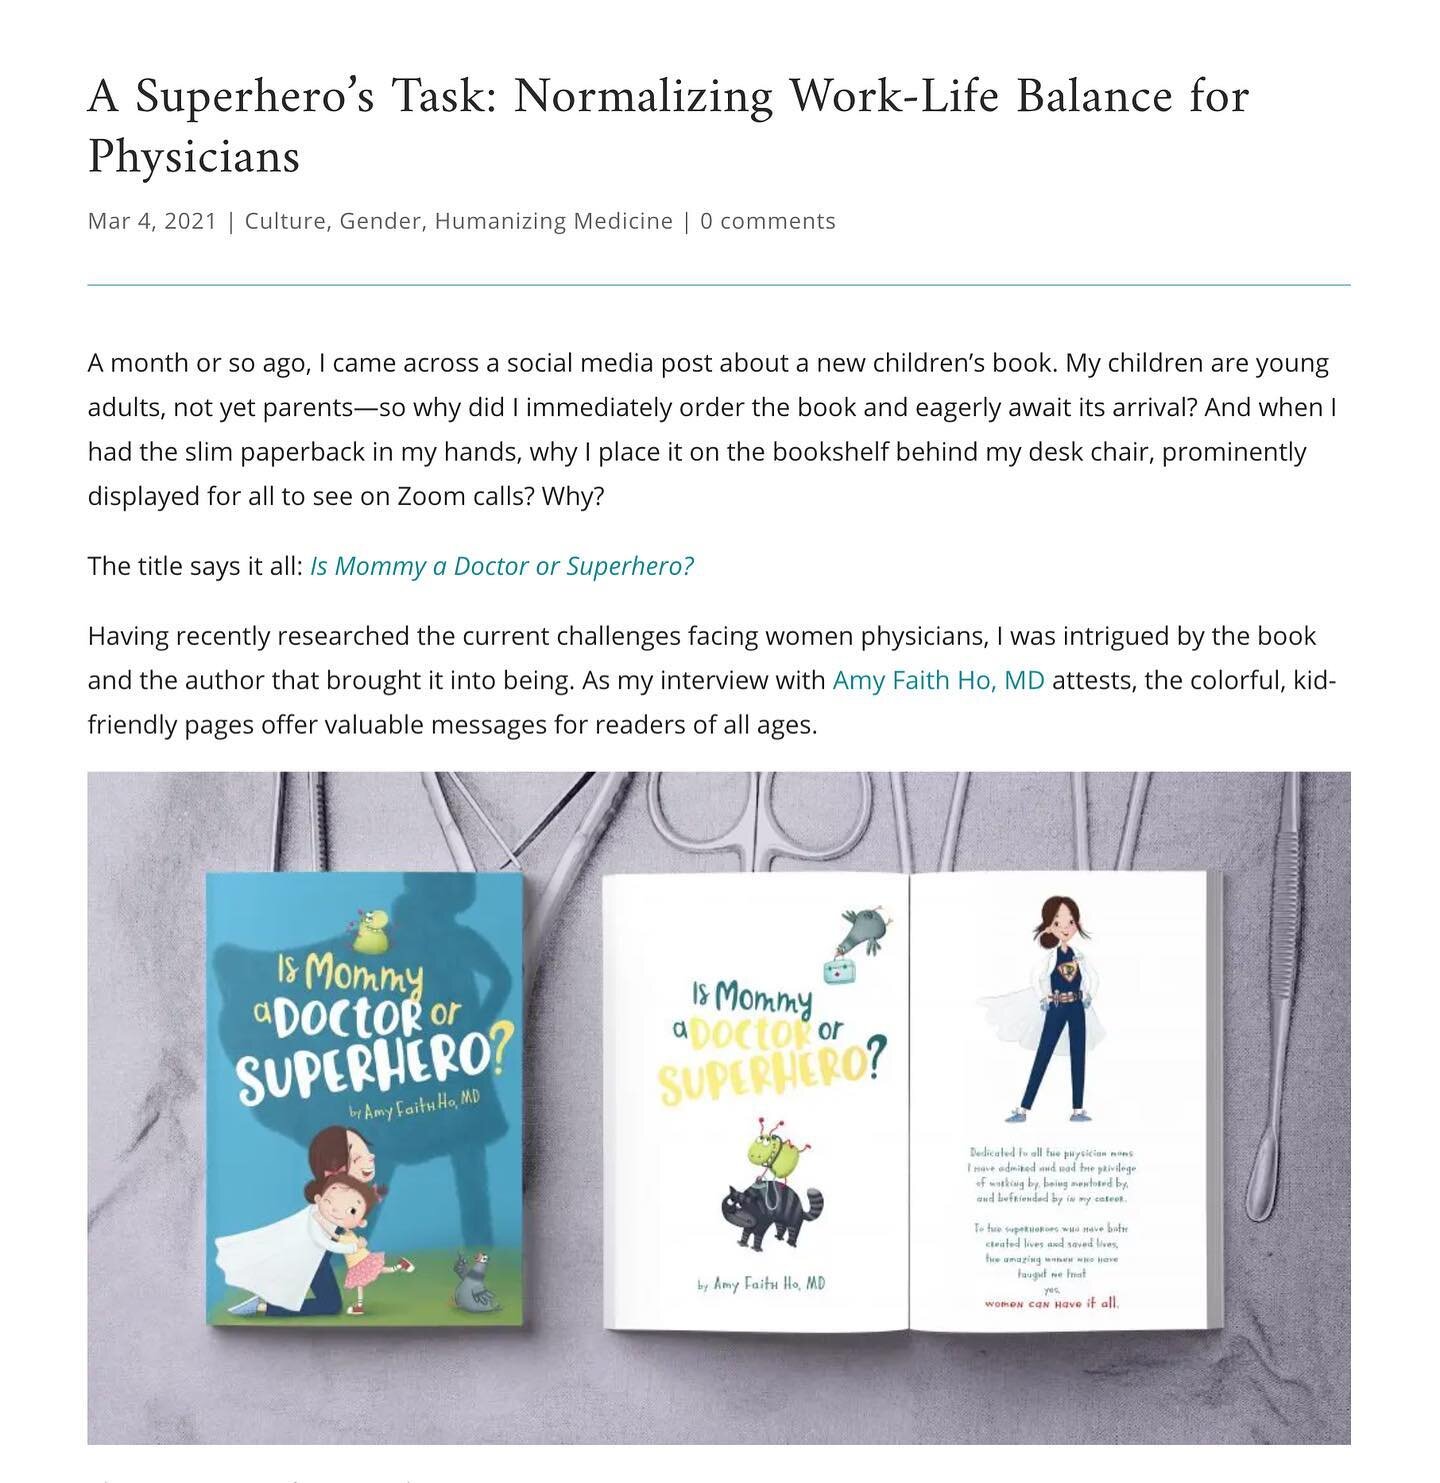 One of the most fun and unexpected side effects of @doctormommybook has been connecting with amazing women around the world on shared interests of #womenempowerment ❤️👩🏼👩🏾👩🏻👩🏿👩🏼&zwj;🦰 A lovely write up on &ldquo;Is Mommy a Doctor or Superh